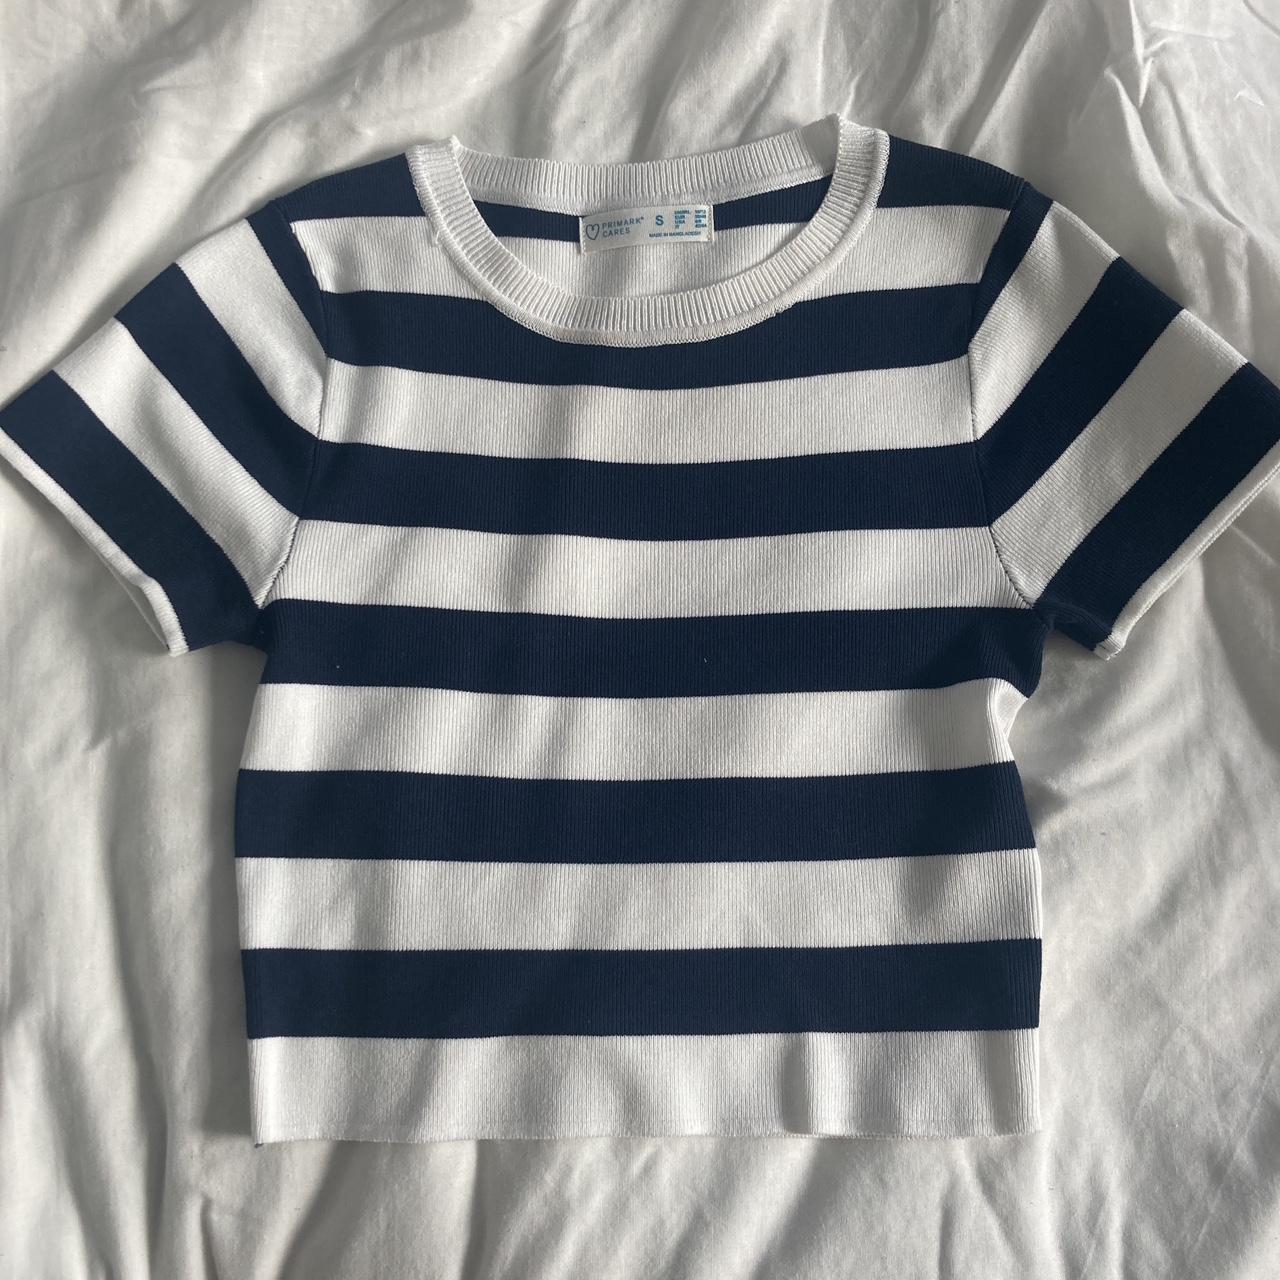 Blue & white striped shirts are seriously trending! From Primark